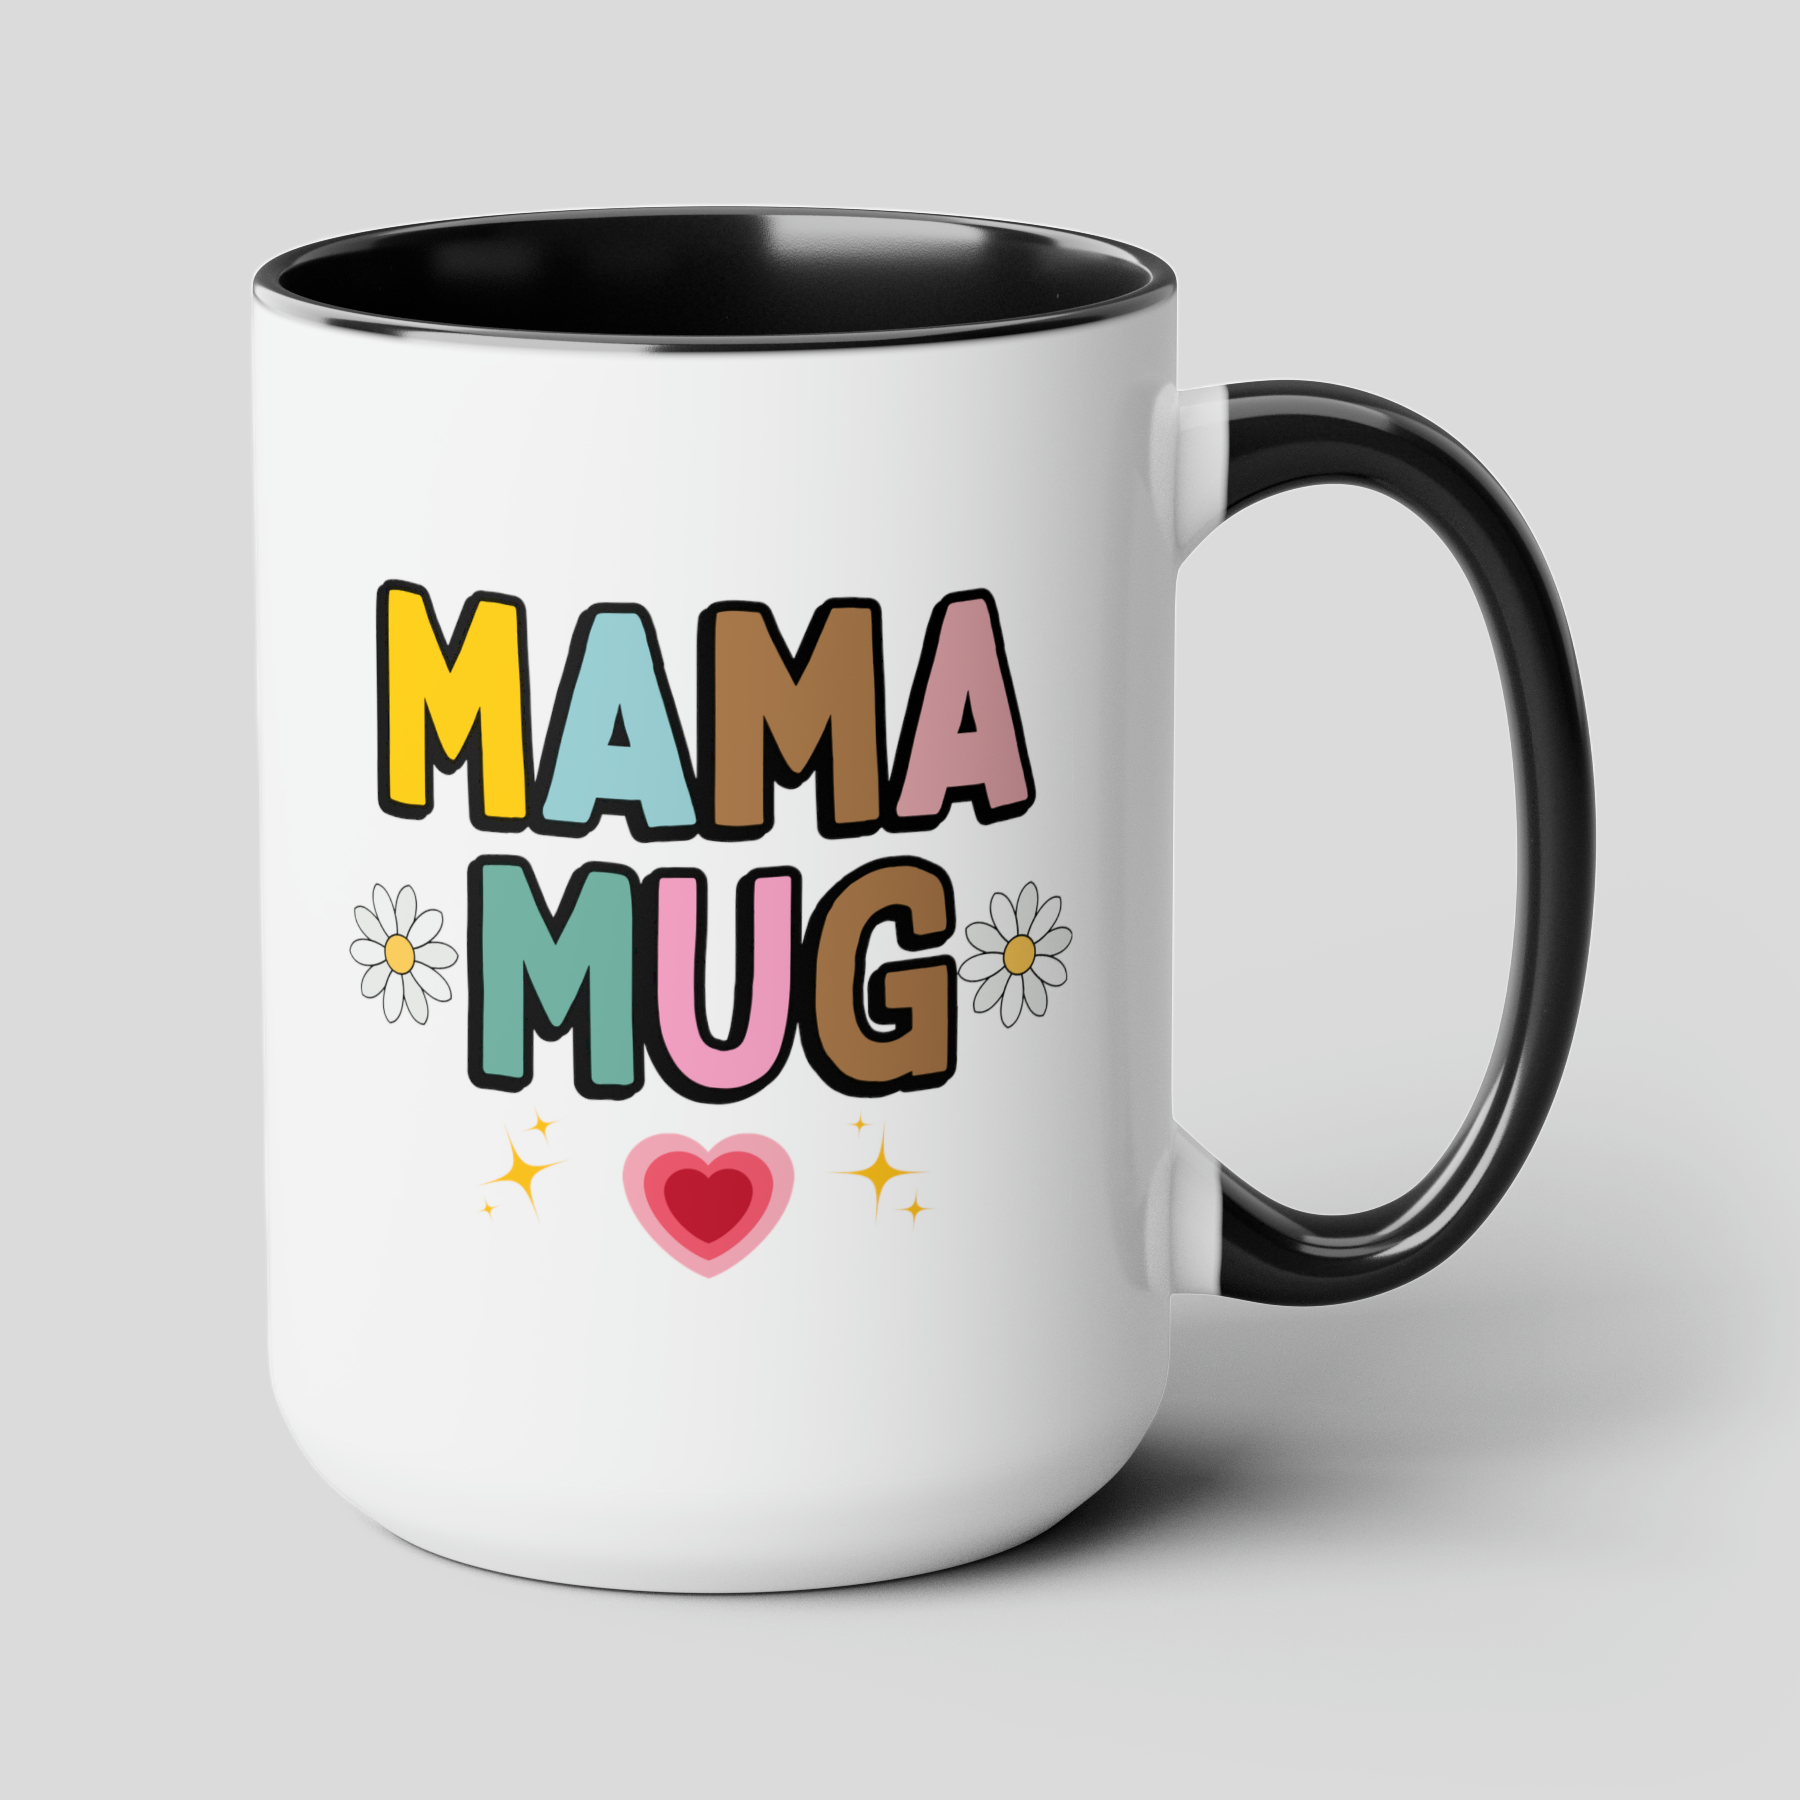 Mama Mug 15oz white with black accent funny large coffee mug gift for new mom mother pregnancy announcement baby shower waveywares wavey wares wavywares wavy wares cover